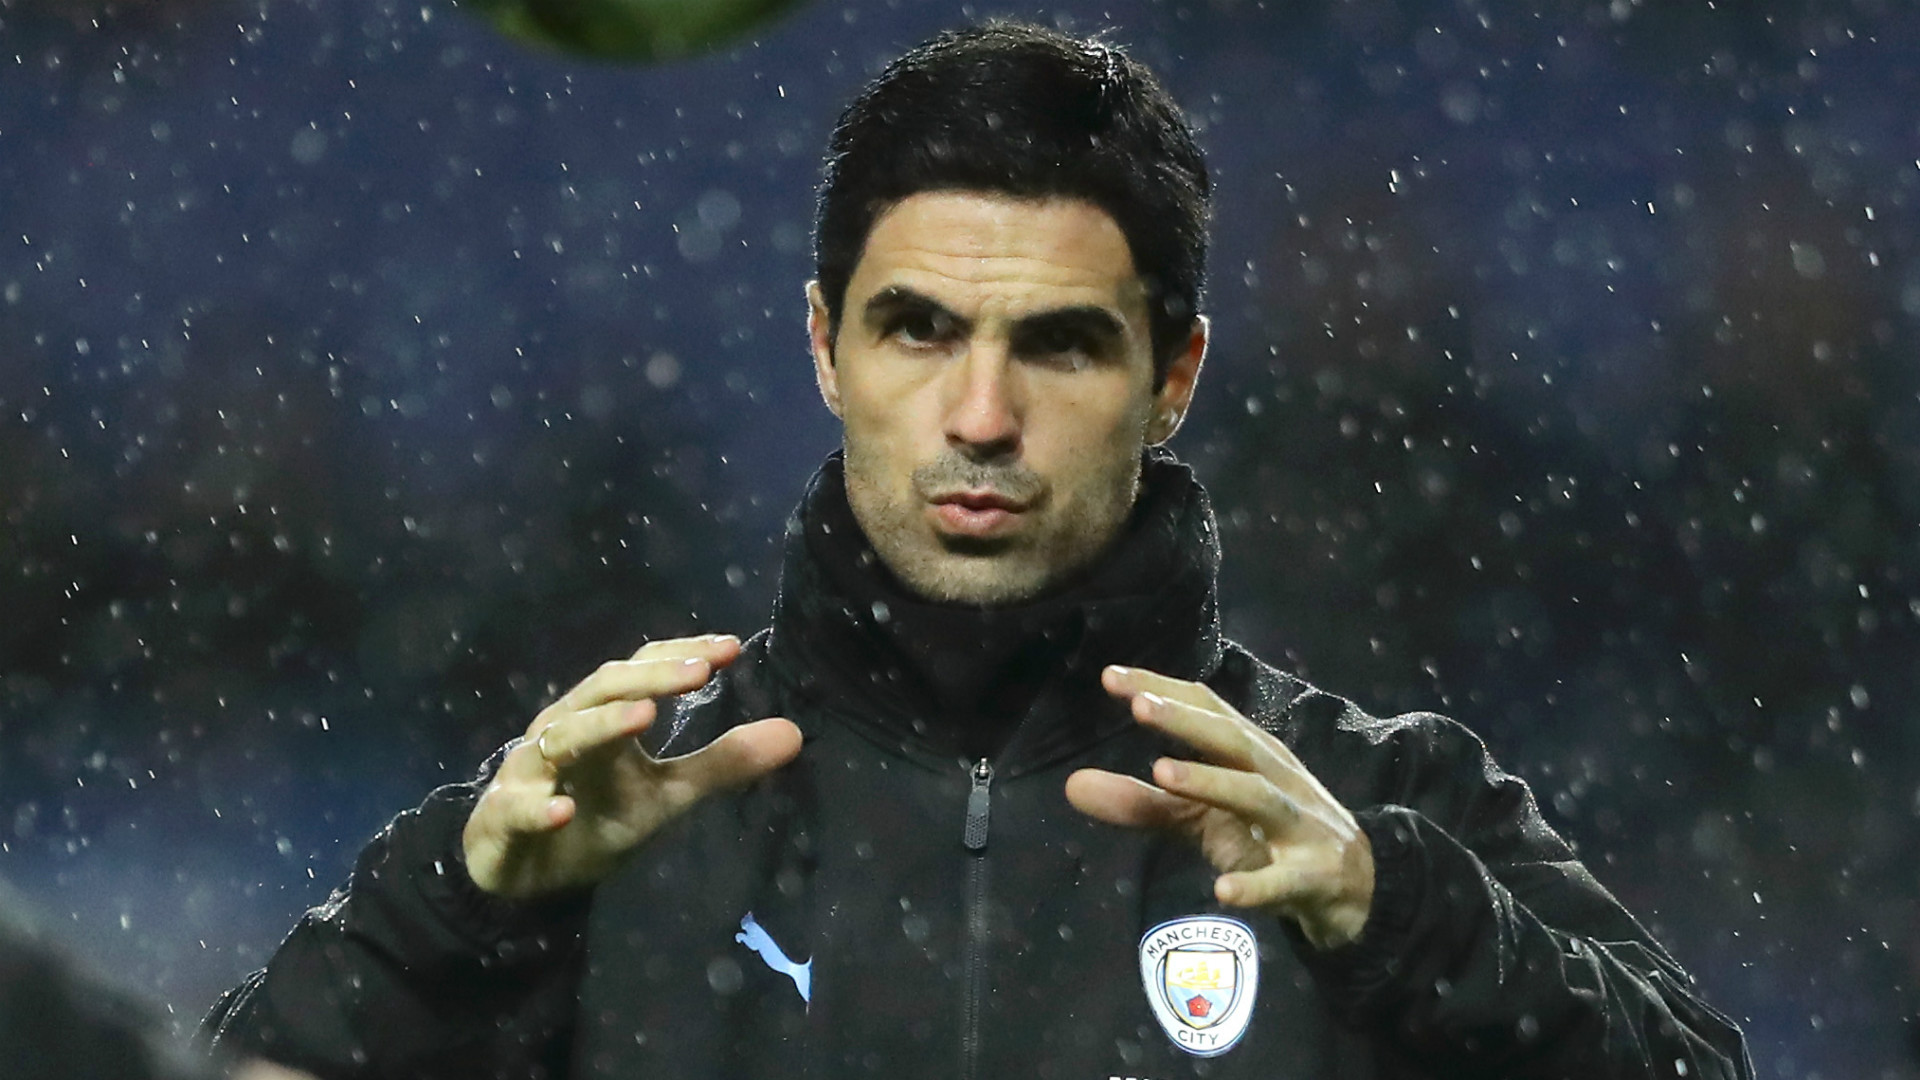 New Arsenal boss Arteta reveals board have made it 'very clear' they want him to compete for trophies